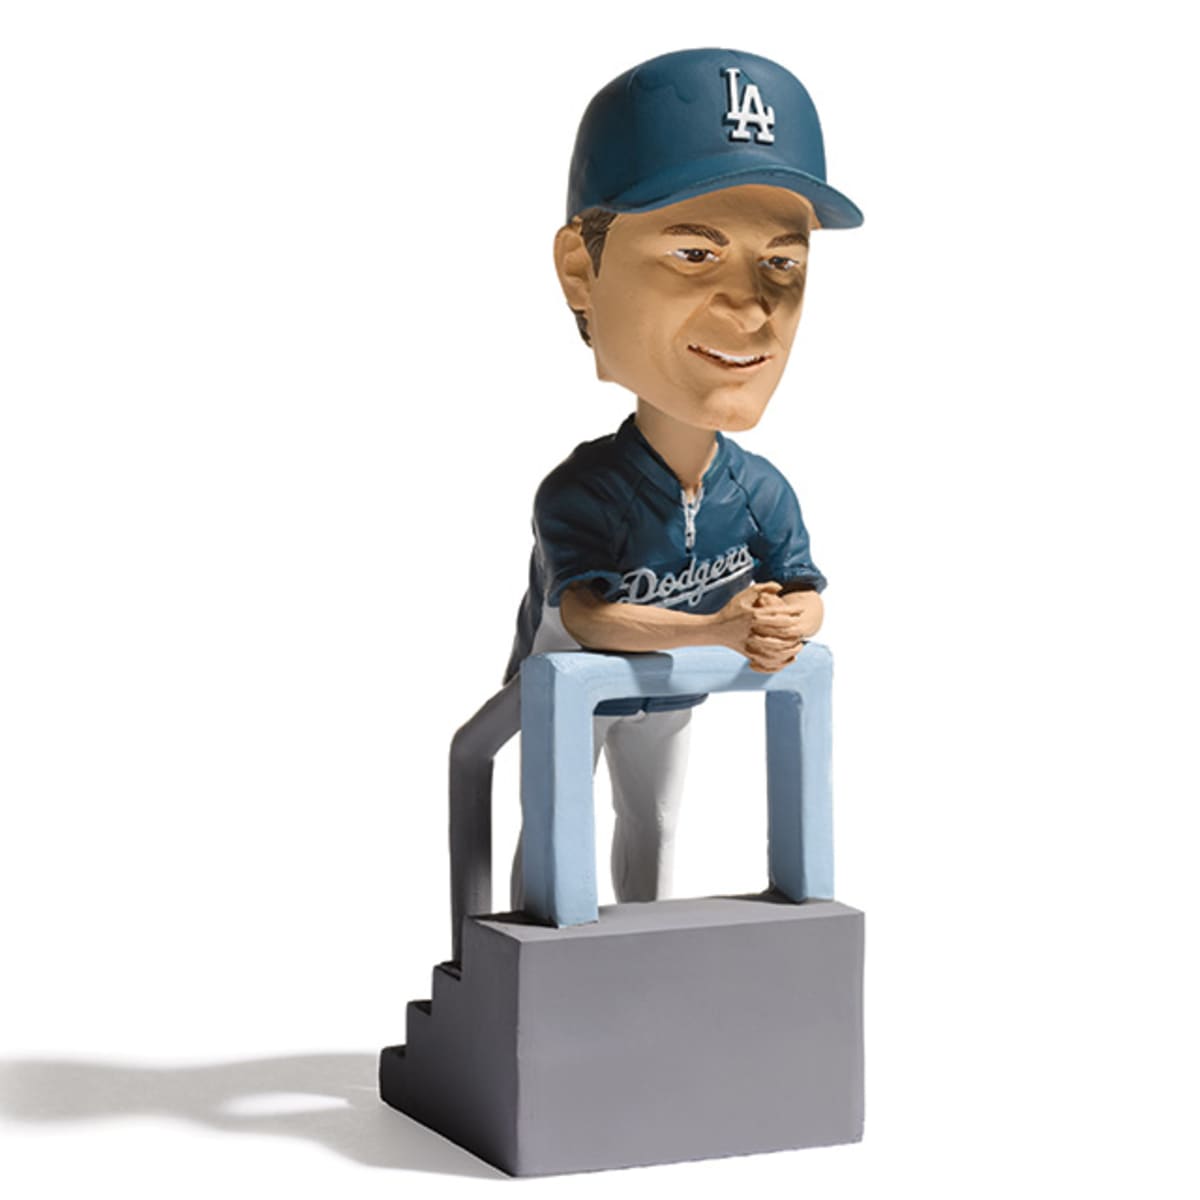 The Dodgers will hold a Babe Ruth bobblehead day next season